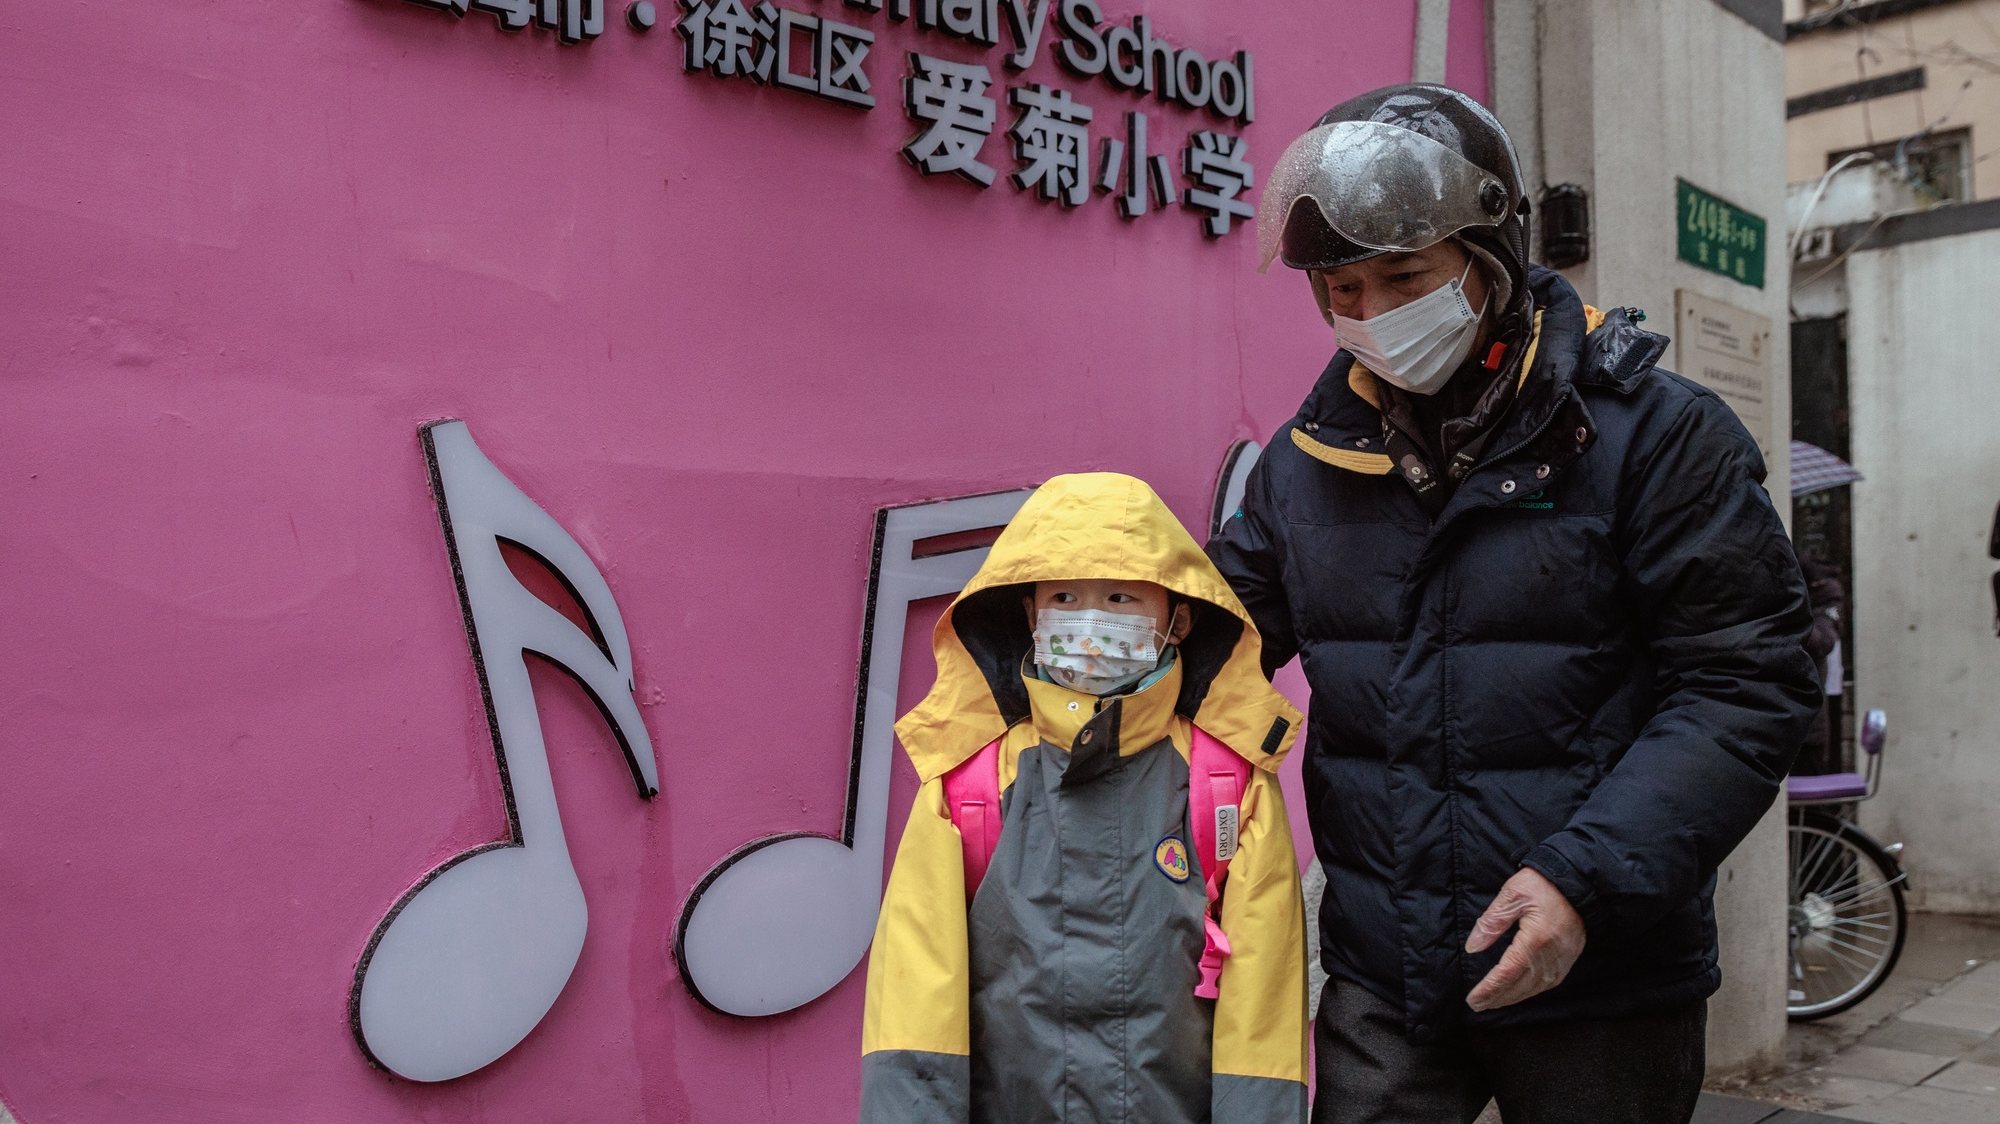 epa10464283 A child escorted by a parent enters their school in Shanghai, China, 13 February 2023. After the Chinese New Year holiday and online classes for three years, students in China are back on campuses. According to the latest guidebook on epidemic prevention and control, schools can restore on-site teaching if there are no COVID-19 cases. Students and school personnel will undergo seven days of health monitoring and minimise gatherings.  EPA/ALEX PLAVEVSKI